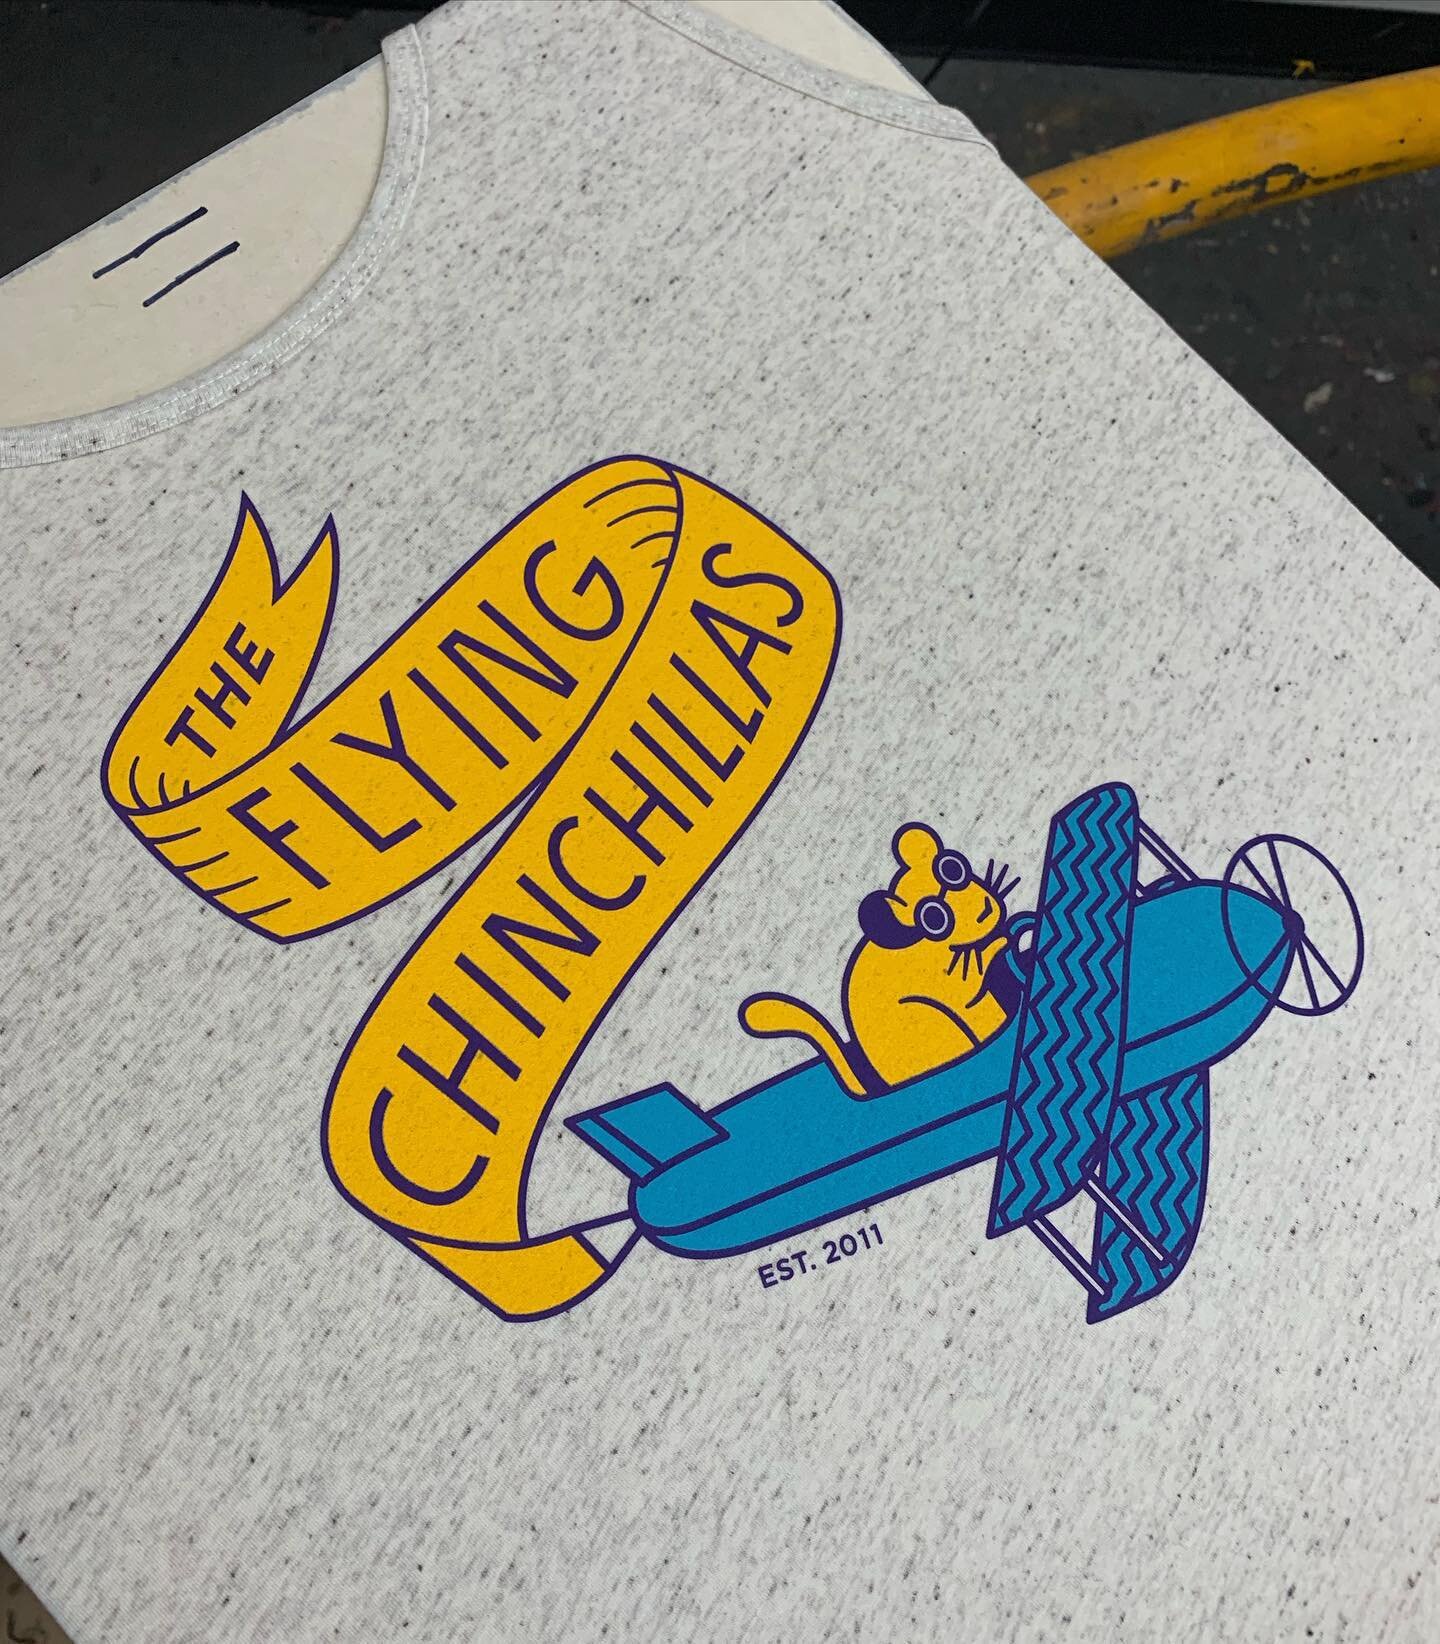 Even though it&rsquo;s currently -7 degrees.. it&rsquo;s always oatmeal tank season for The Flying Chinchillas.
.
.
.
#screenprinting #print #tank #flying #chinchilla #flyingchinchilla #jensoncreative